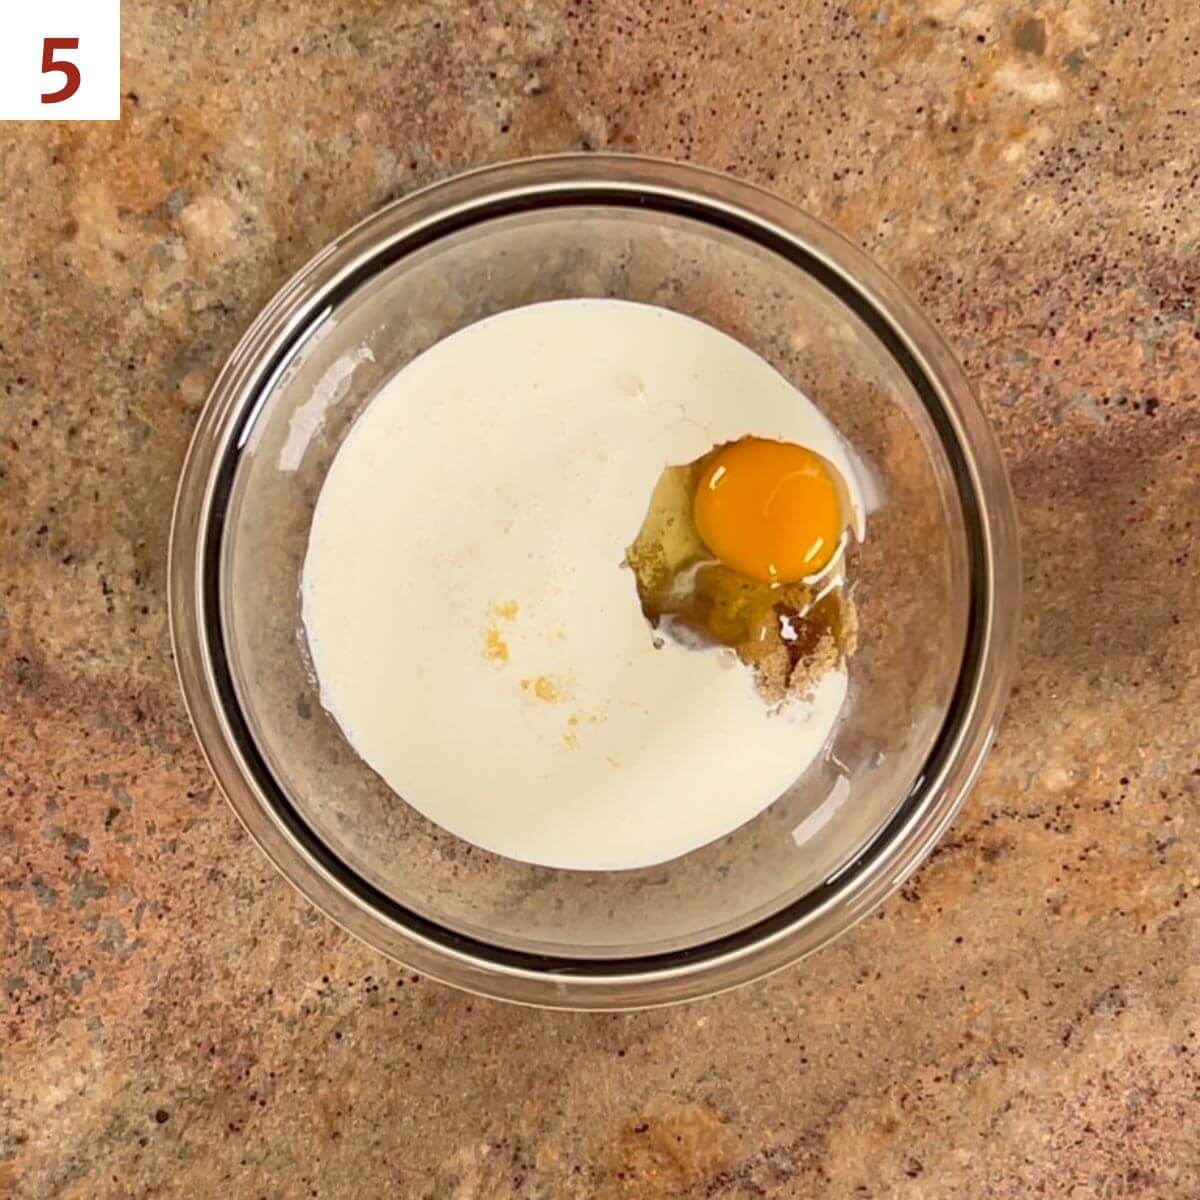 Heavy cream, maple syrup, brown sugar, and egg in a glass bowl from overhead.